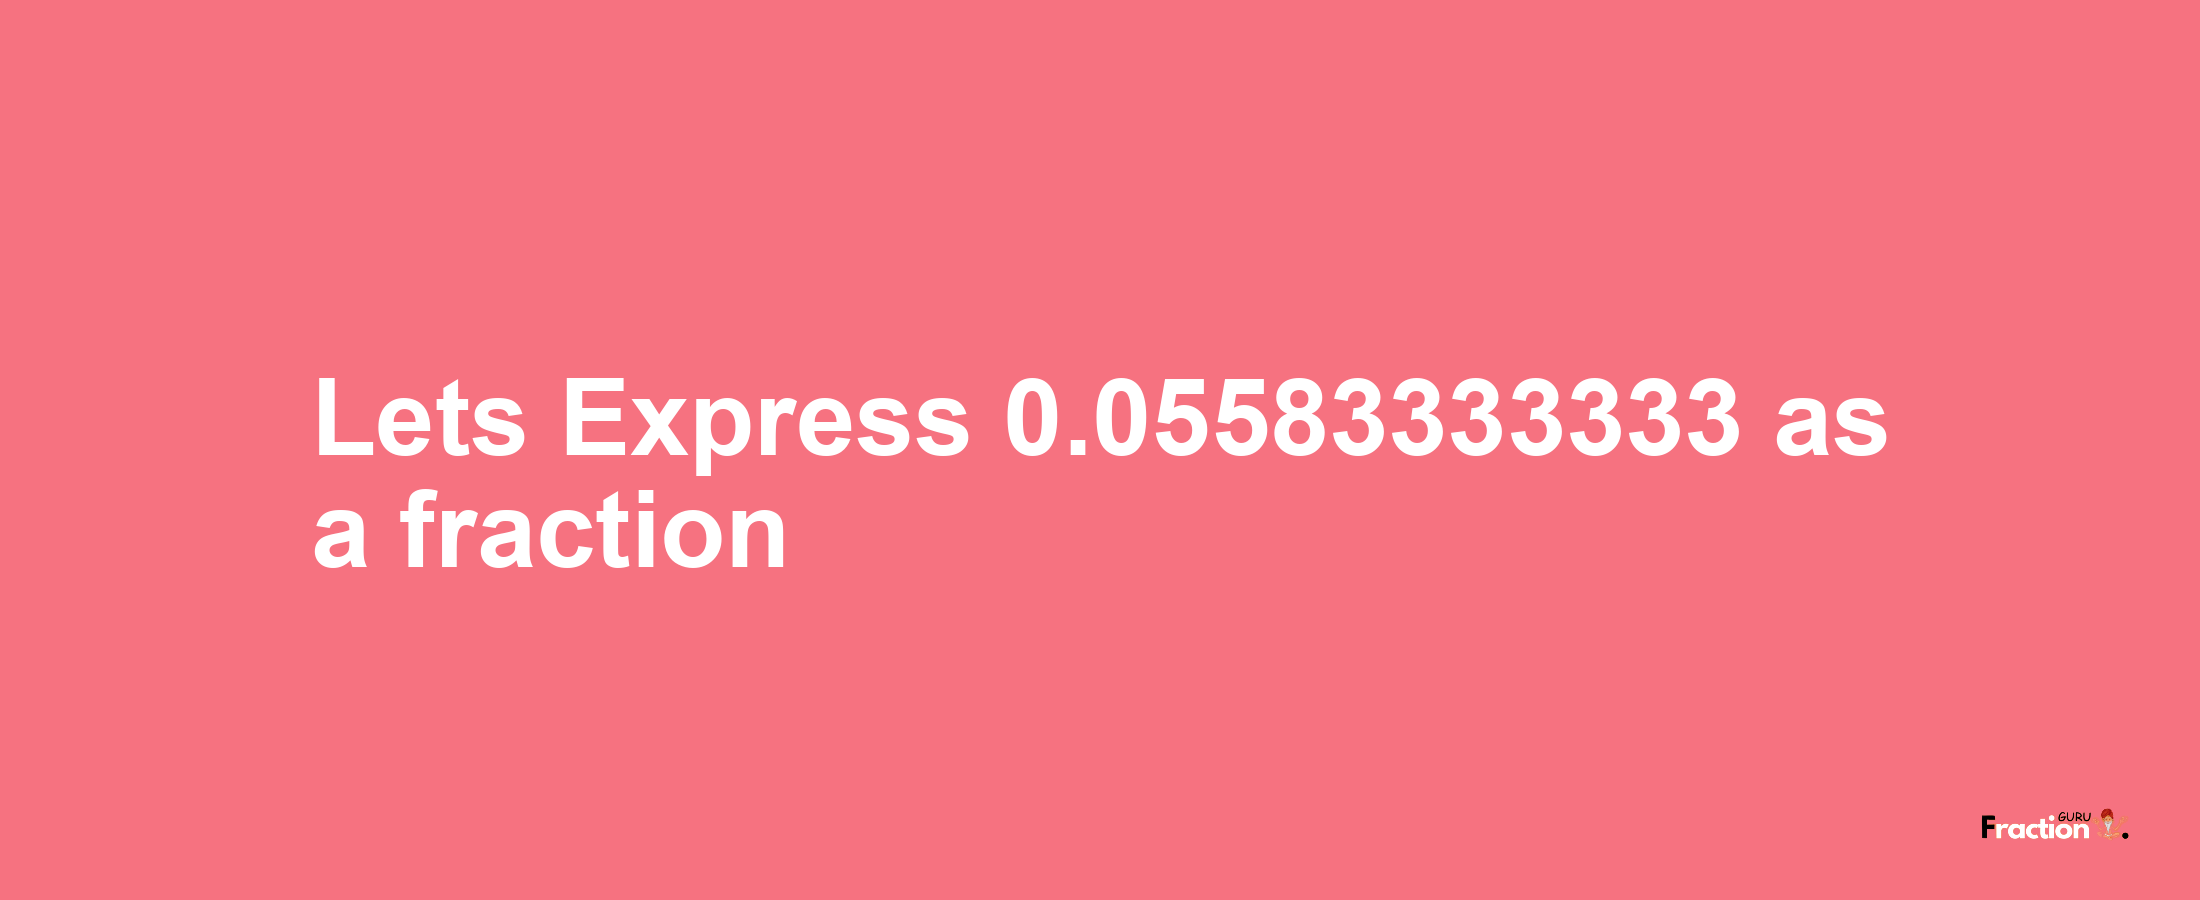 Lets Express 0.05583333333 as afraction